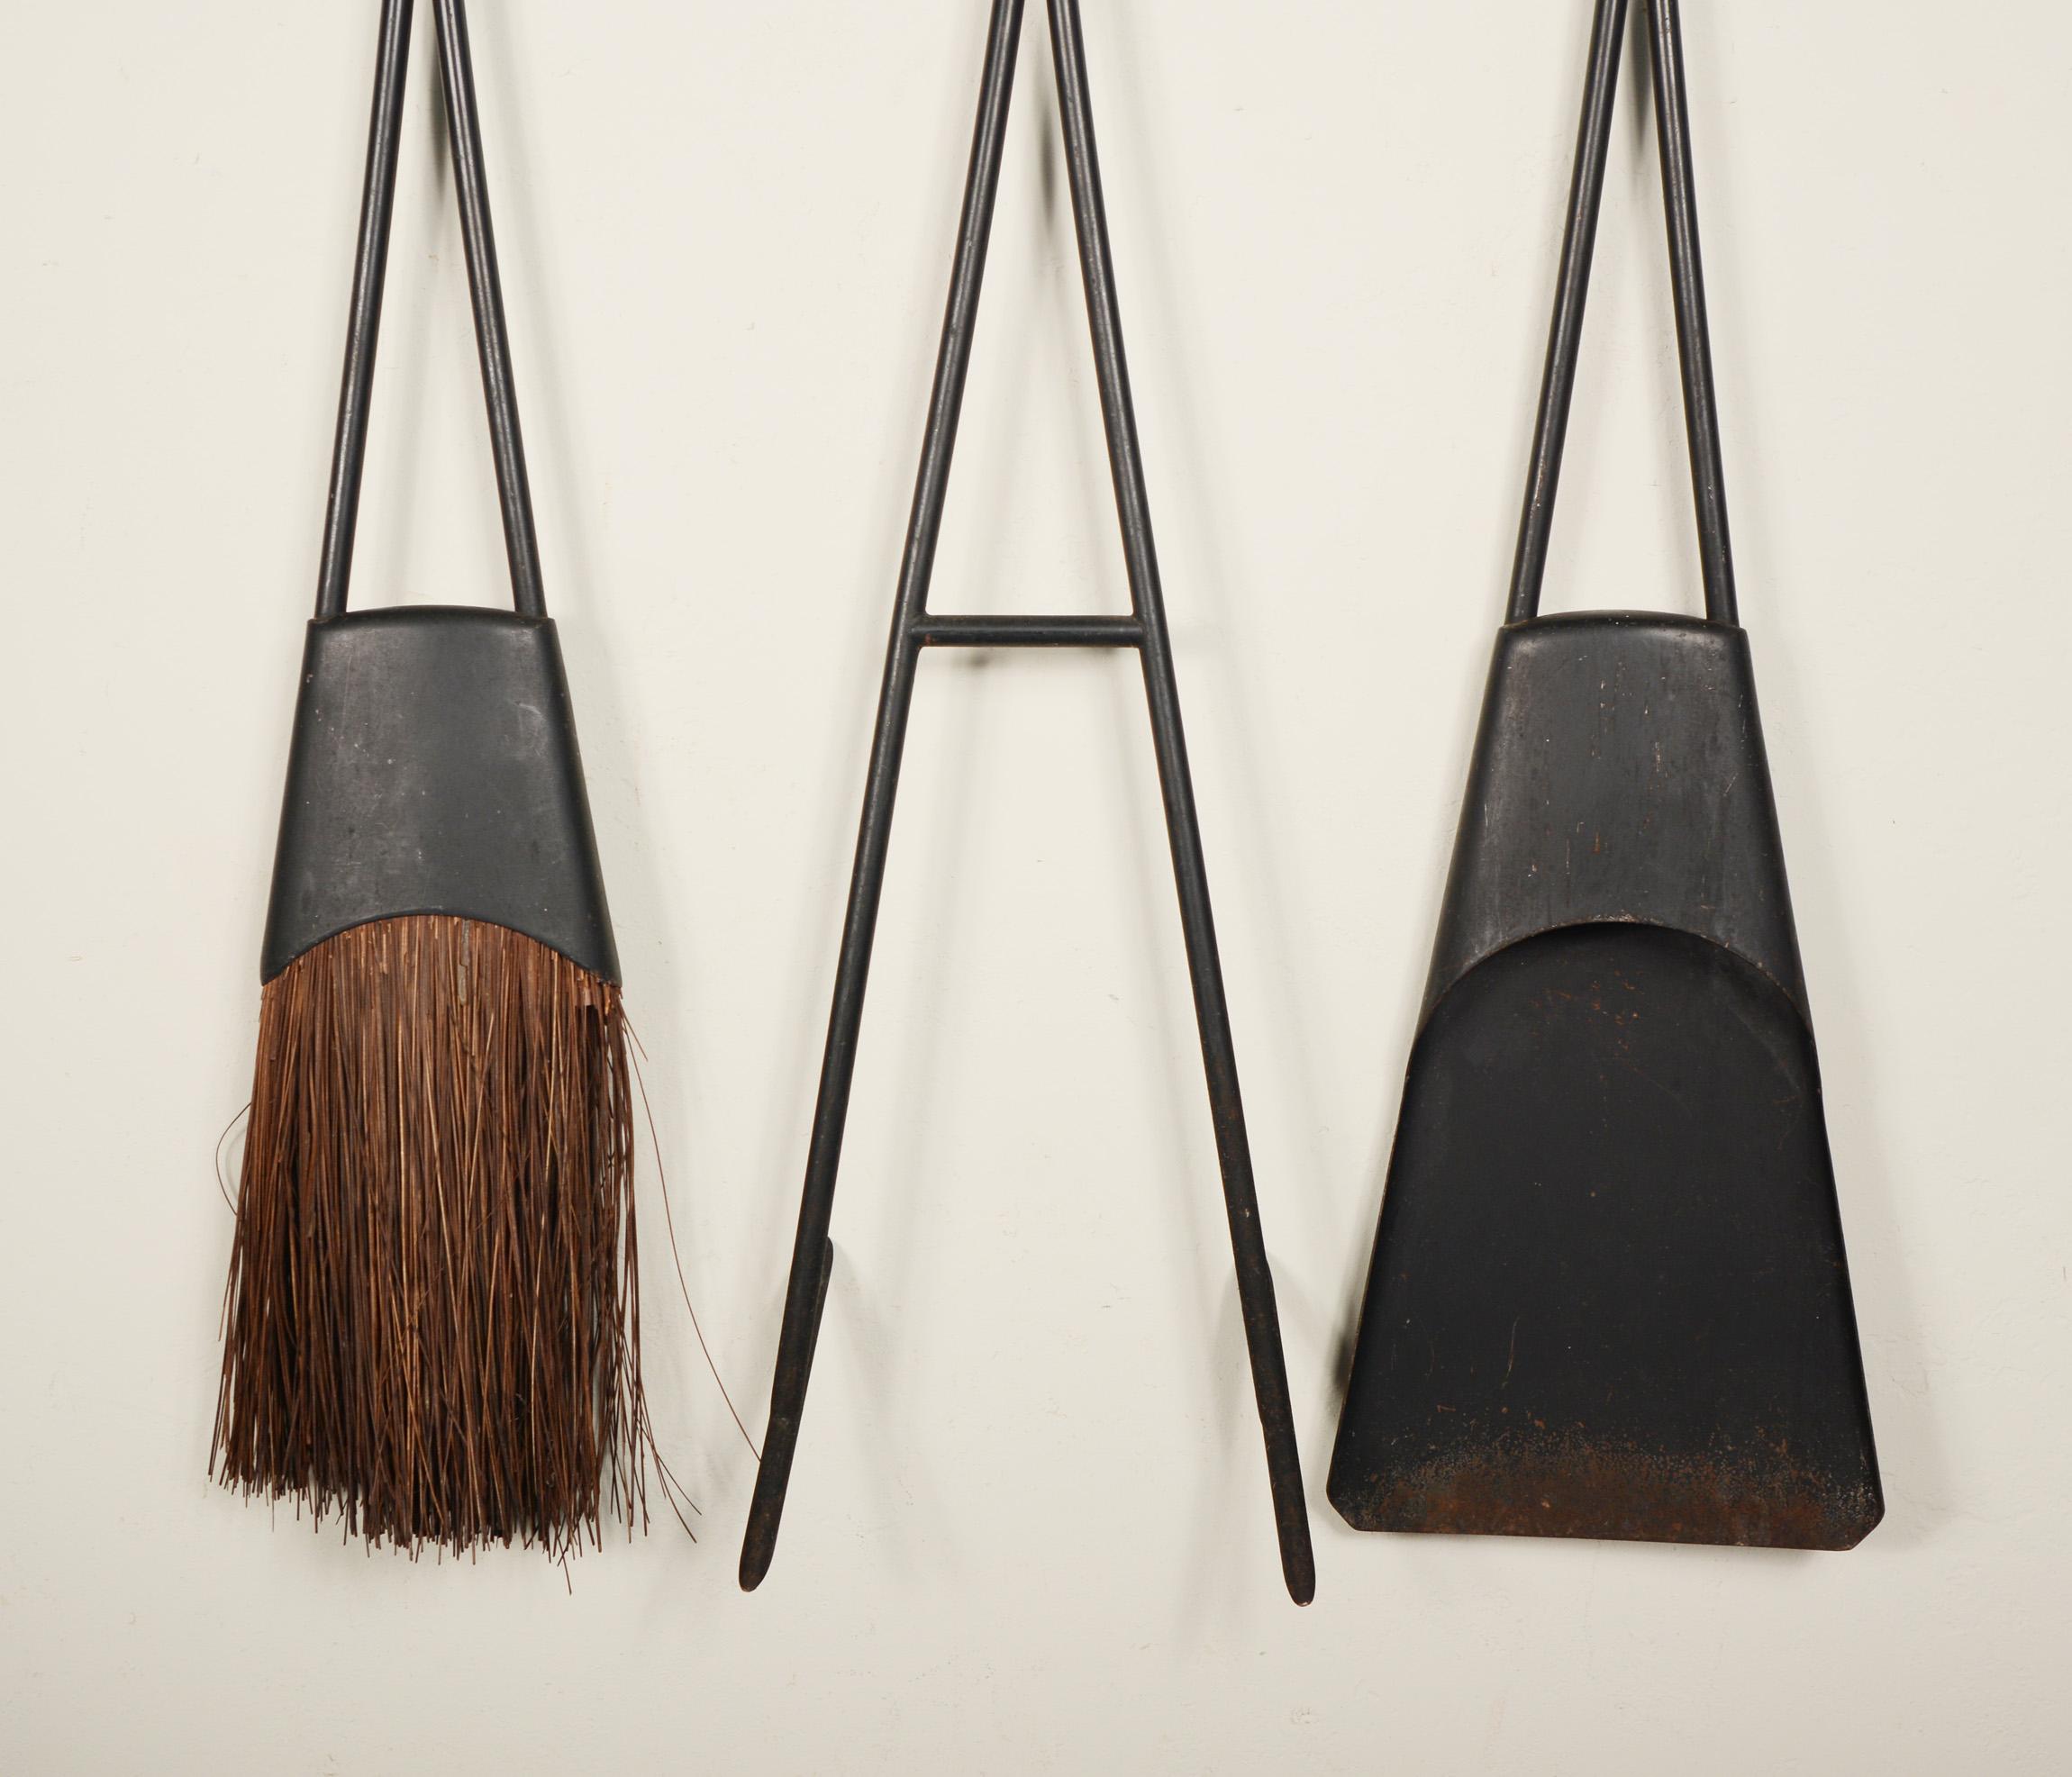 Rare set of Dansk fireplace tools designed by Jens Quistgaard. These consist of a poker, broom and shovel and are held on a wall mounted rack. This set is in original condition. There is wear, paint loss, a little rust on the end of the shovel and